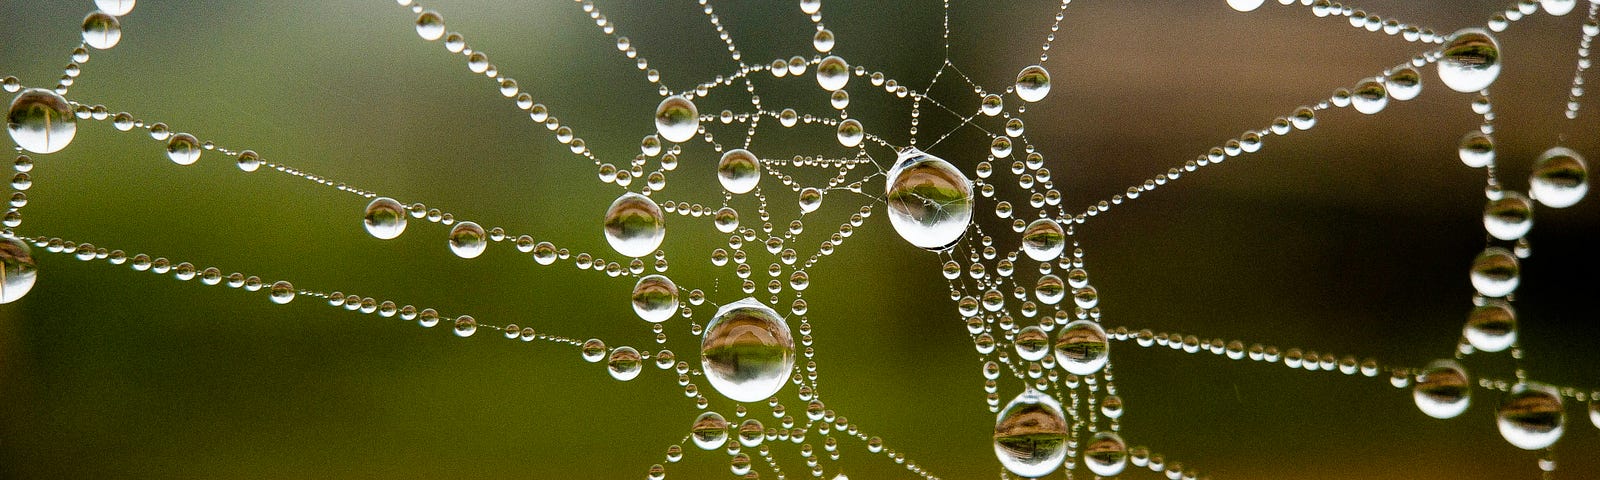 Close-up of beautiful spider web with raindrops hanging on it like crystal jewels, against a blurred background of green and amber.